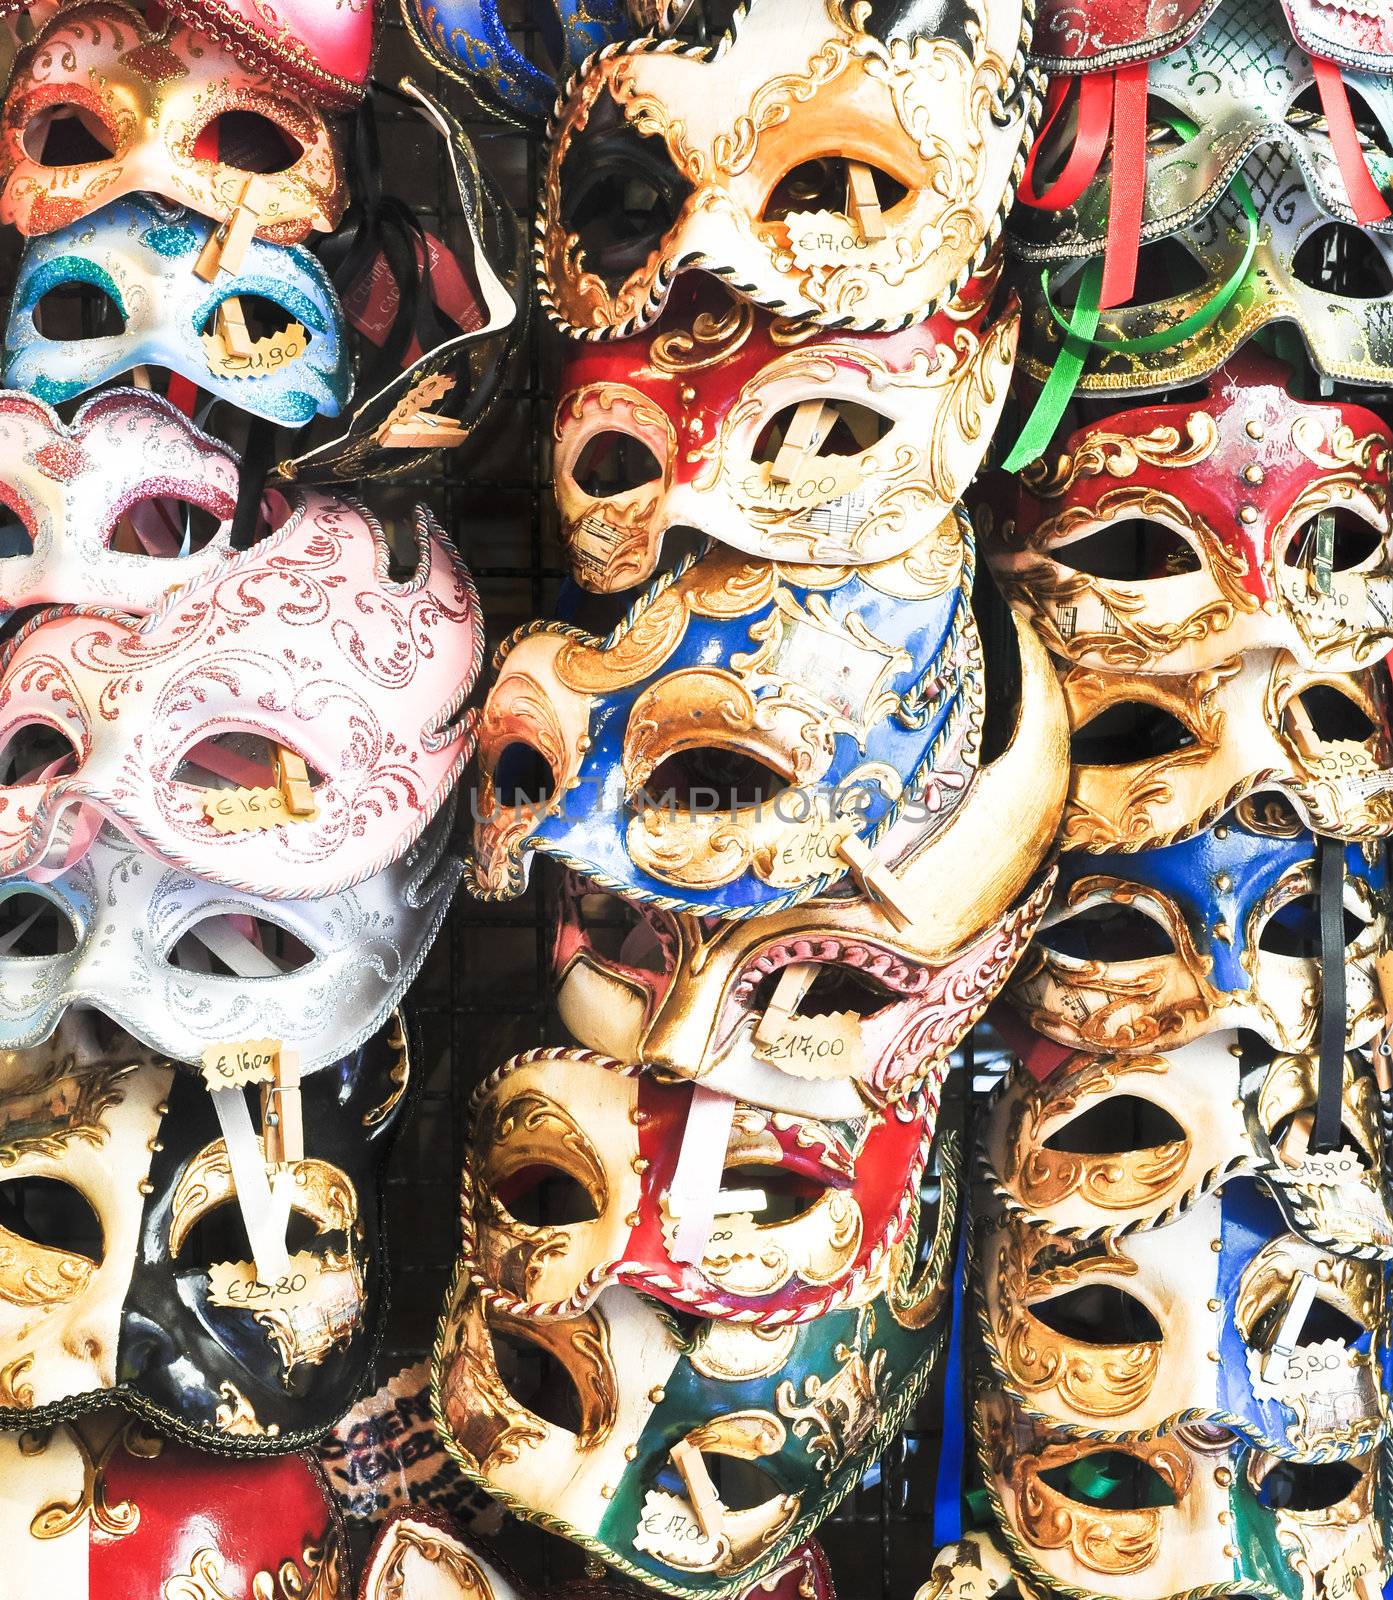 Carnival colorful masks by martinm303